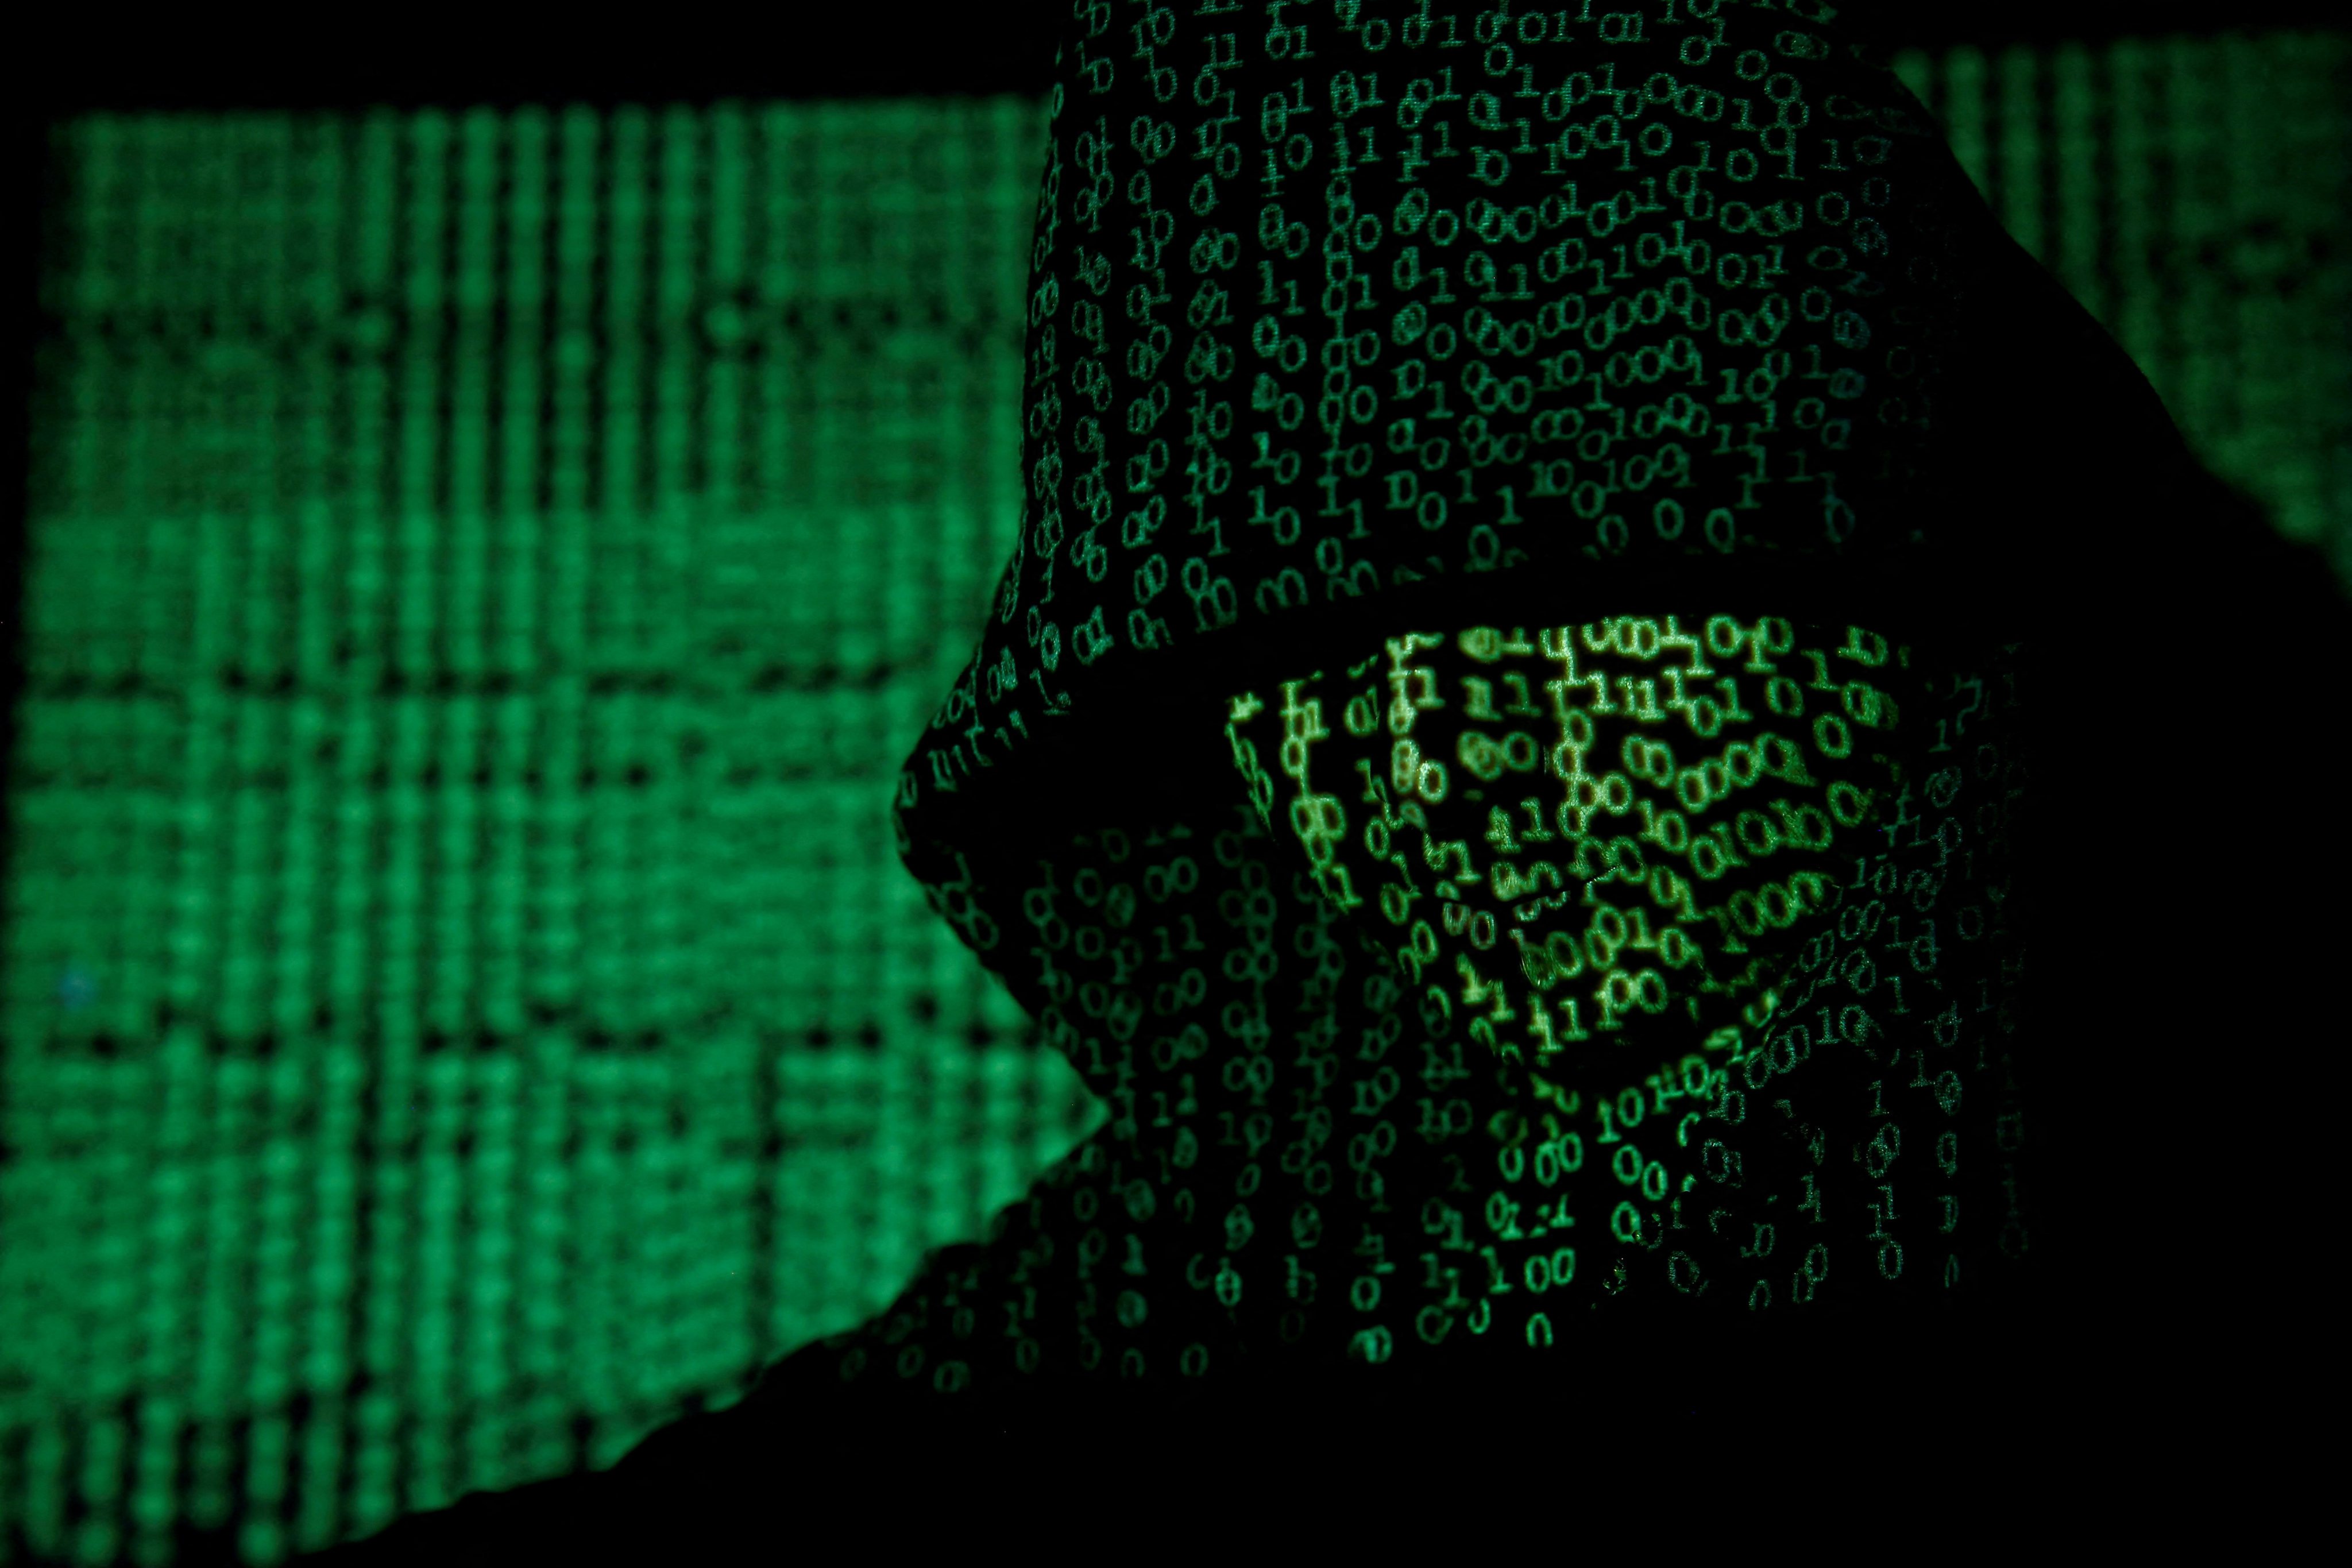 Hacking and other digital intrusions targeting the Philippines have spiked during the first quarter of this year. Photo: Reuters